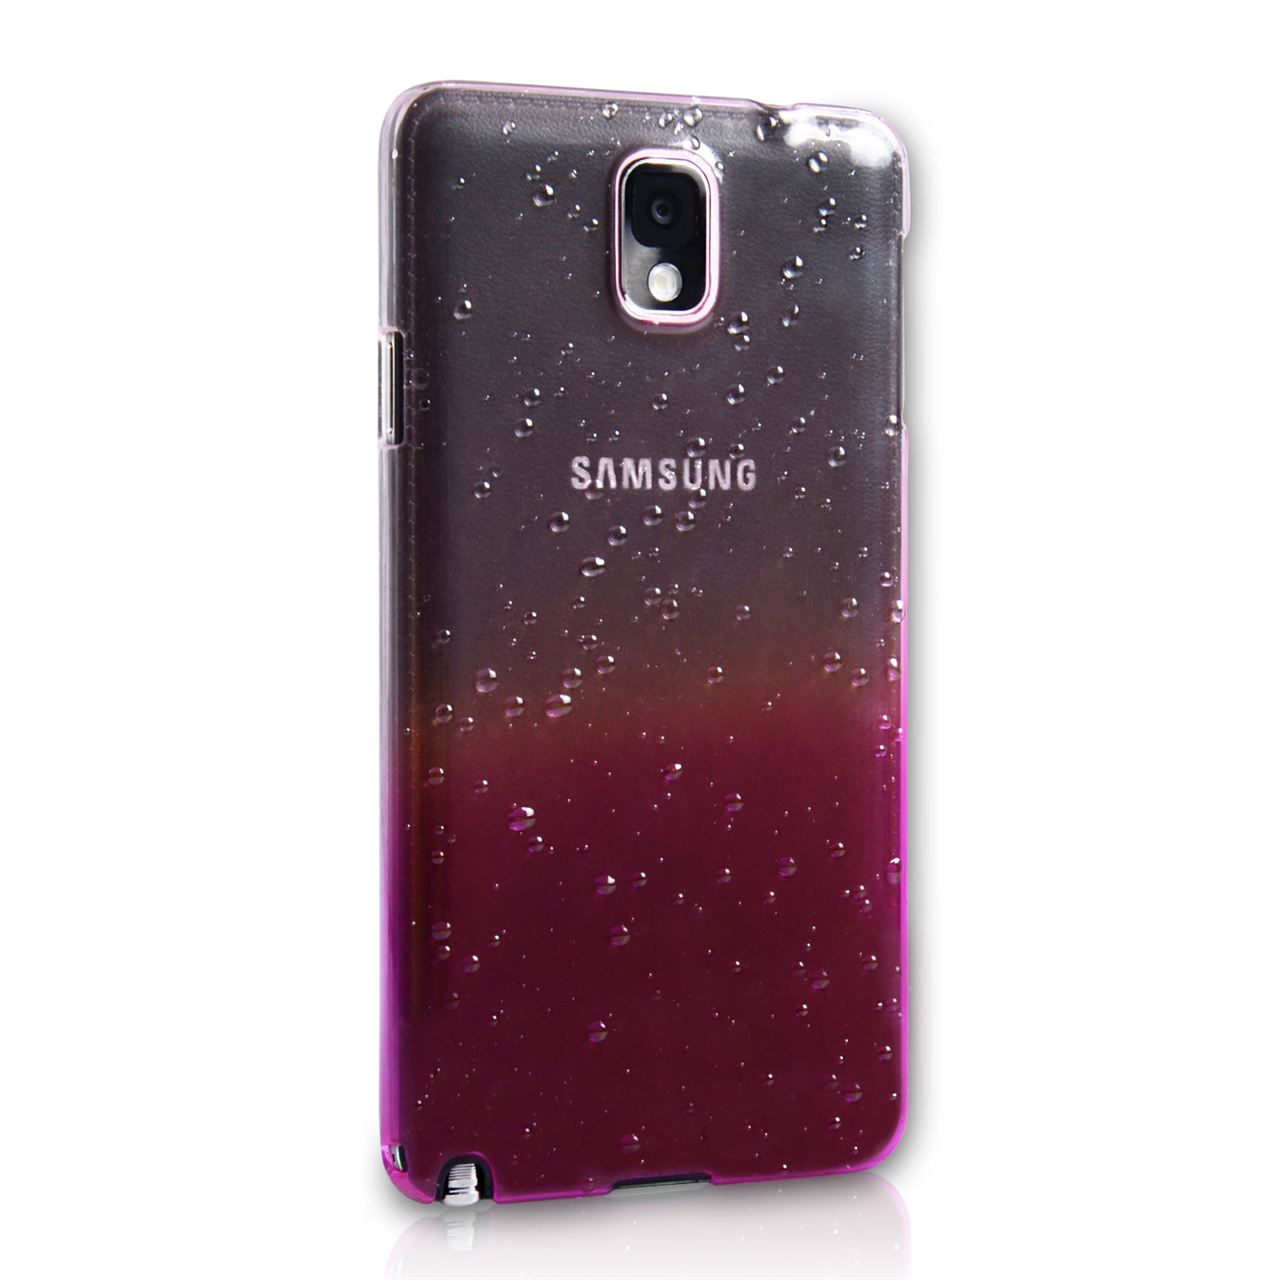 YouSave Samsung Galaxy Note 3 Case - Purple | Mobile Ma